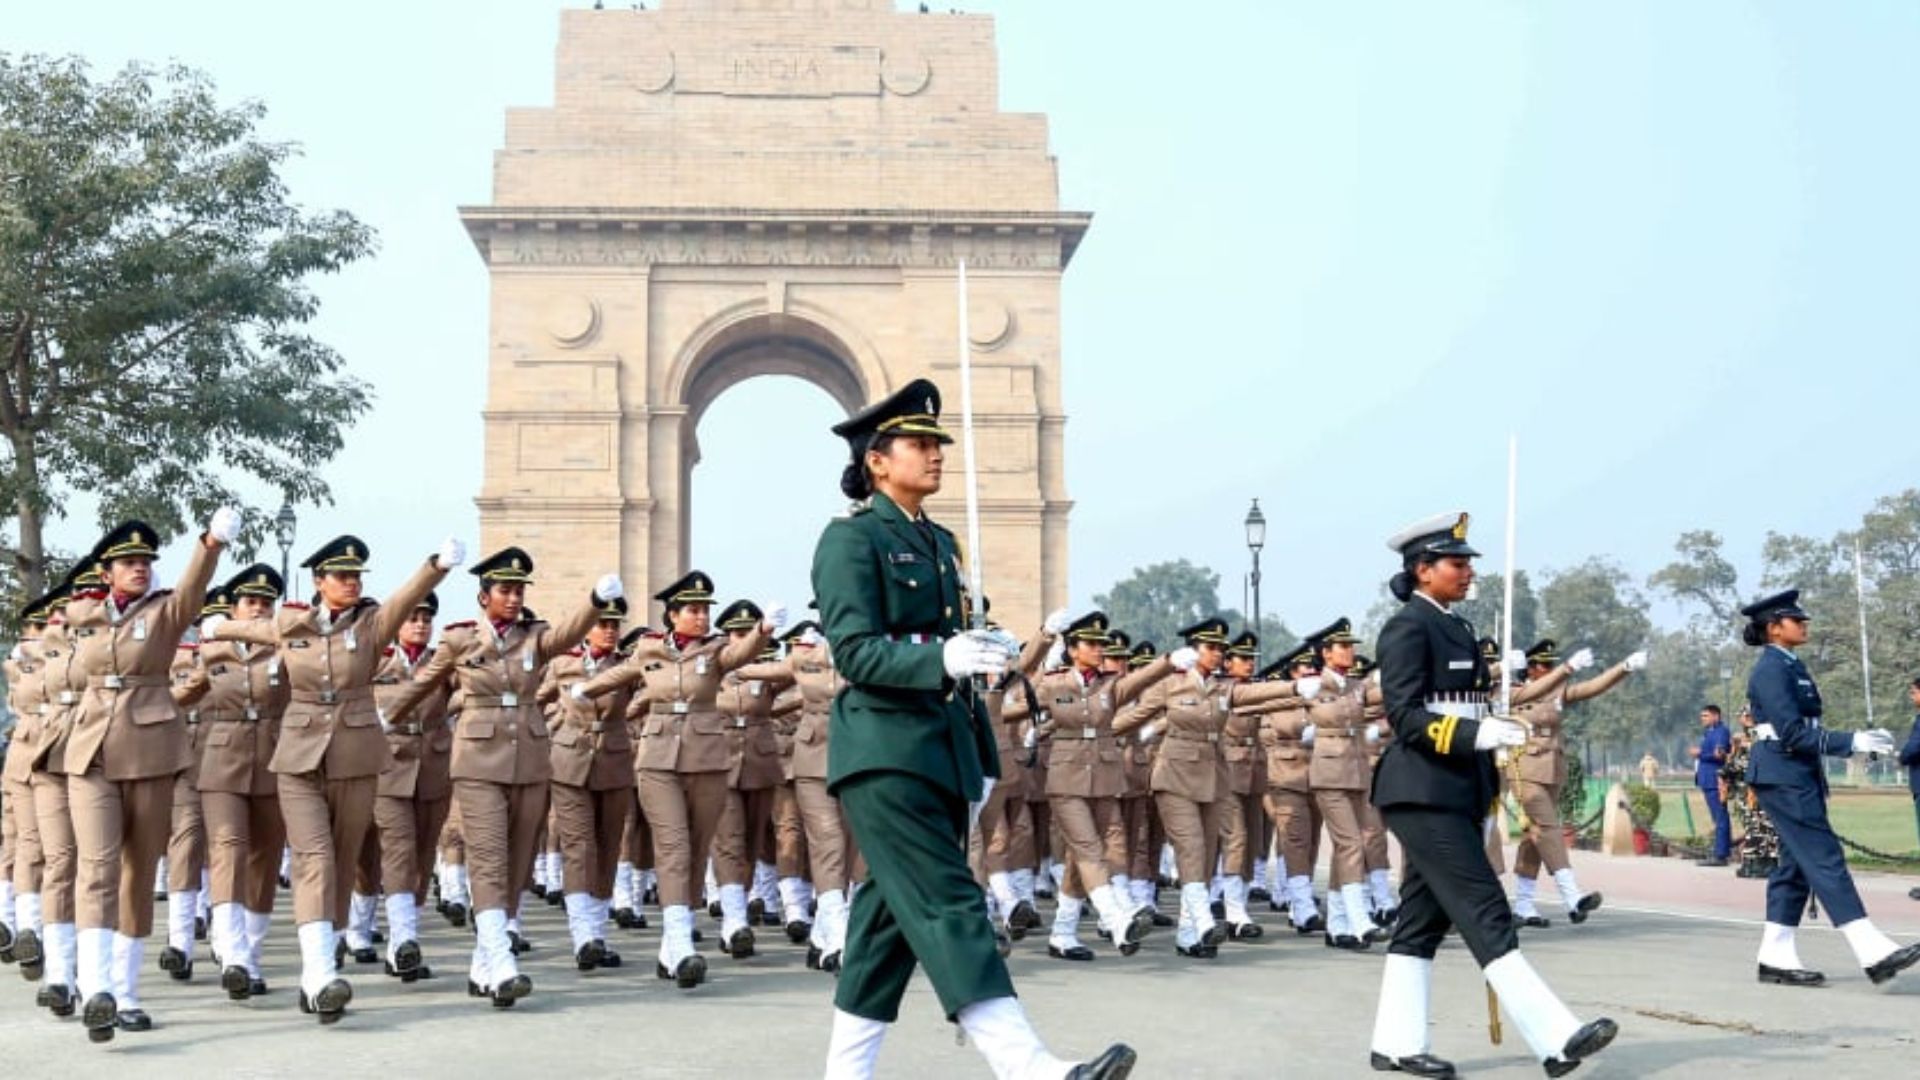 Delhi Police on Republic Day arrangements: Around 8,000 security personnel deployed; security beefed up